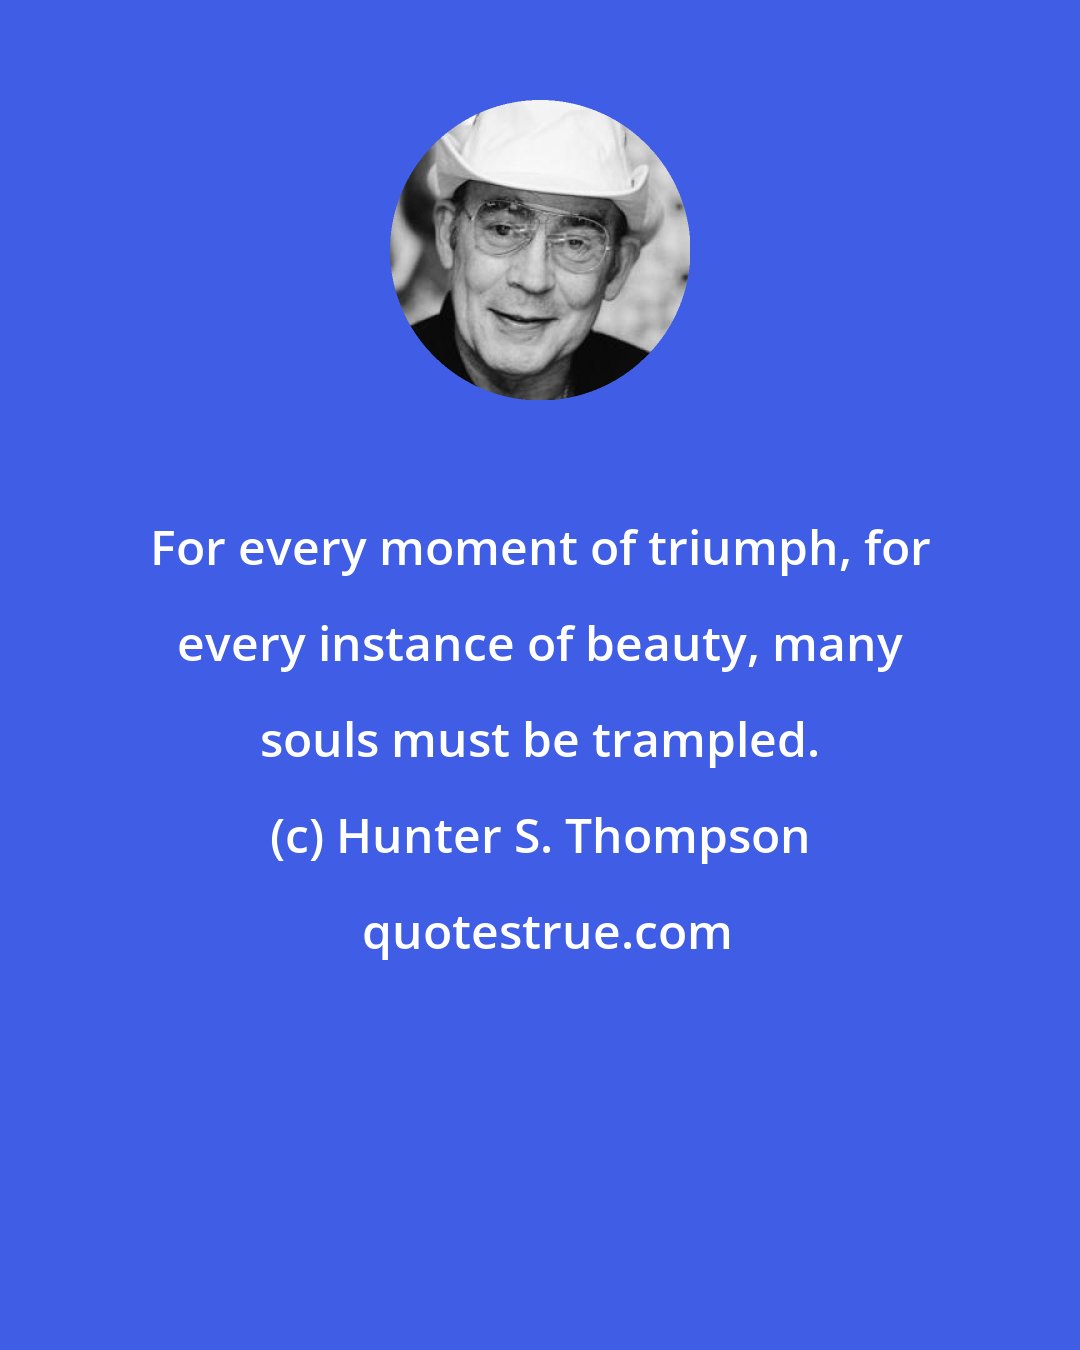 Hunter S. Thompson: For every moment of triumph, for every instance of beauty, many souls must be trampled.